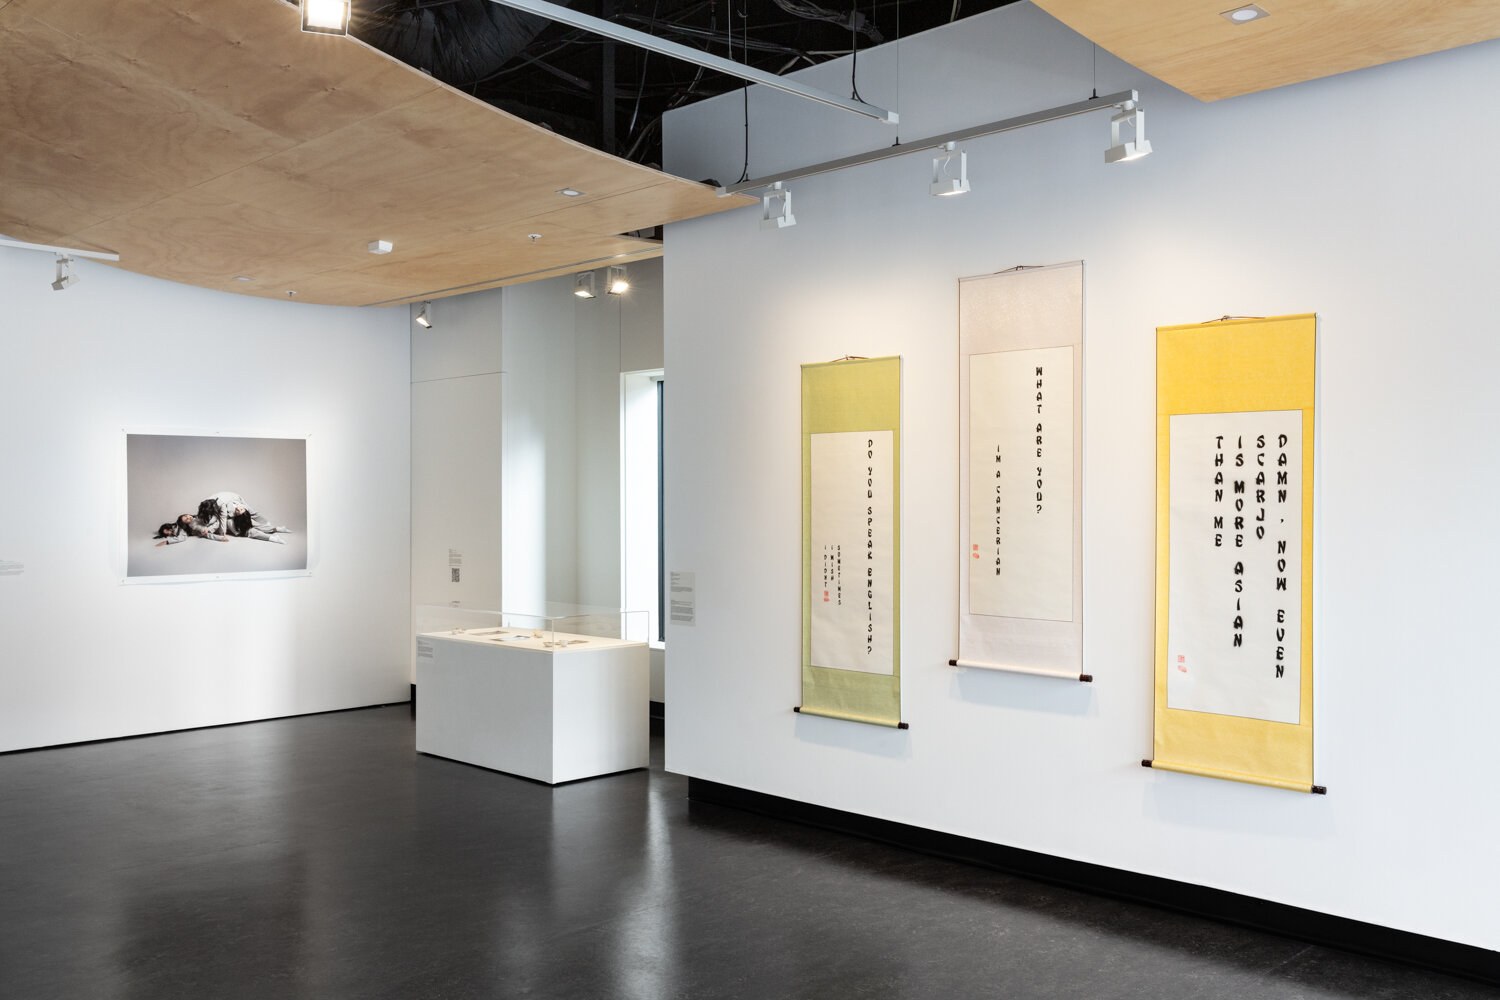  Installation view,  Disobedient Daughters,  Counihan Gallery, 2021. Photo: Janelle Low 